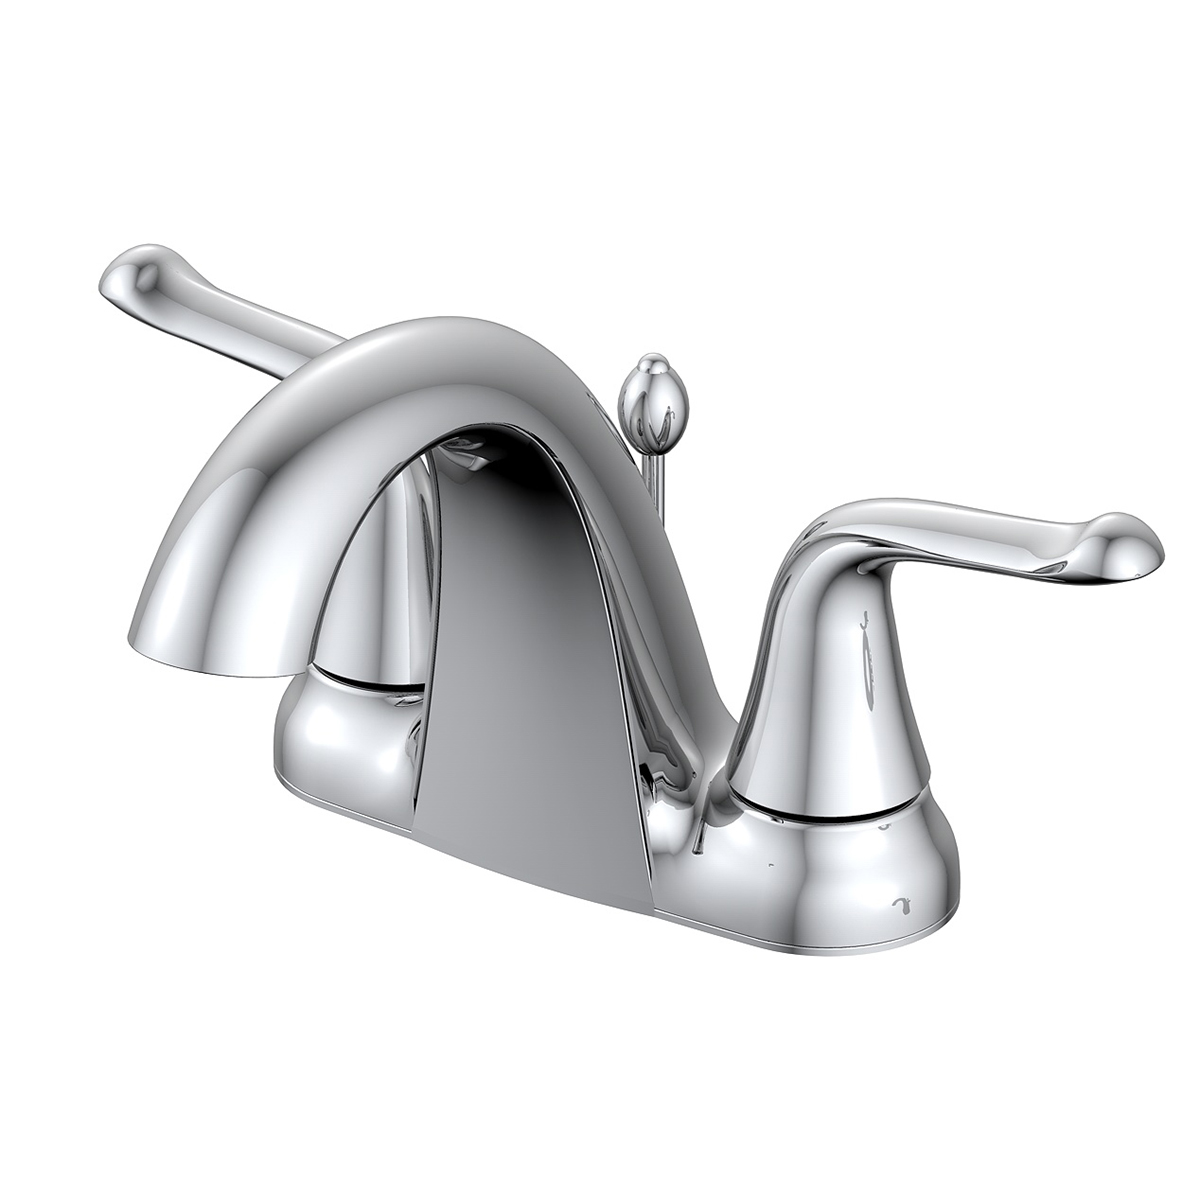 Low Cost Stainless Steel Faucet Deck Mounted Bathroom Faucet